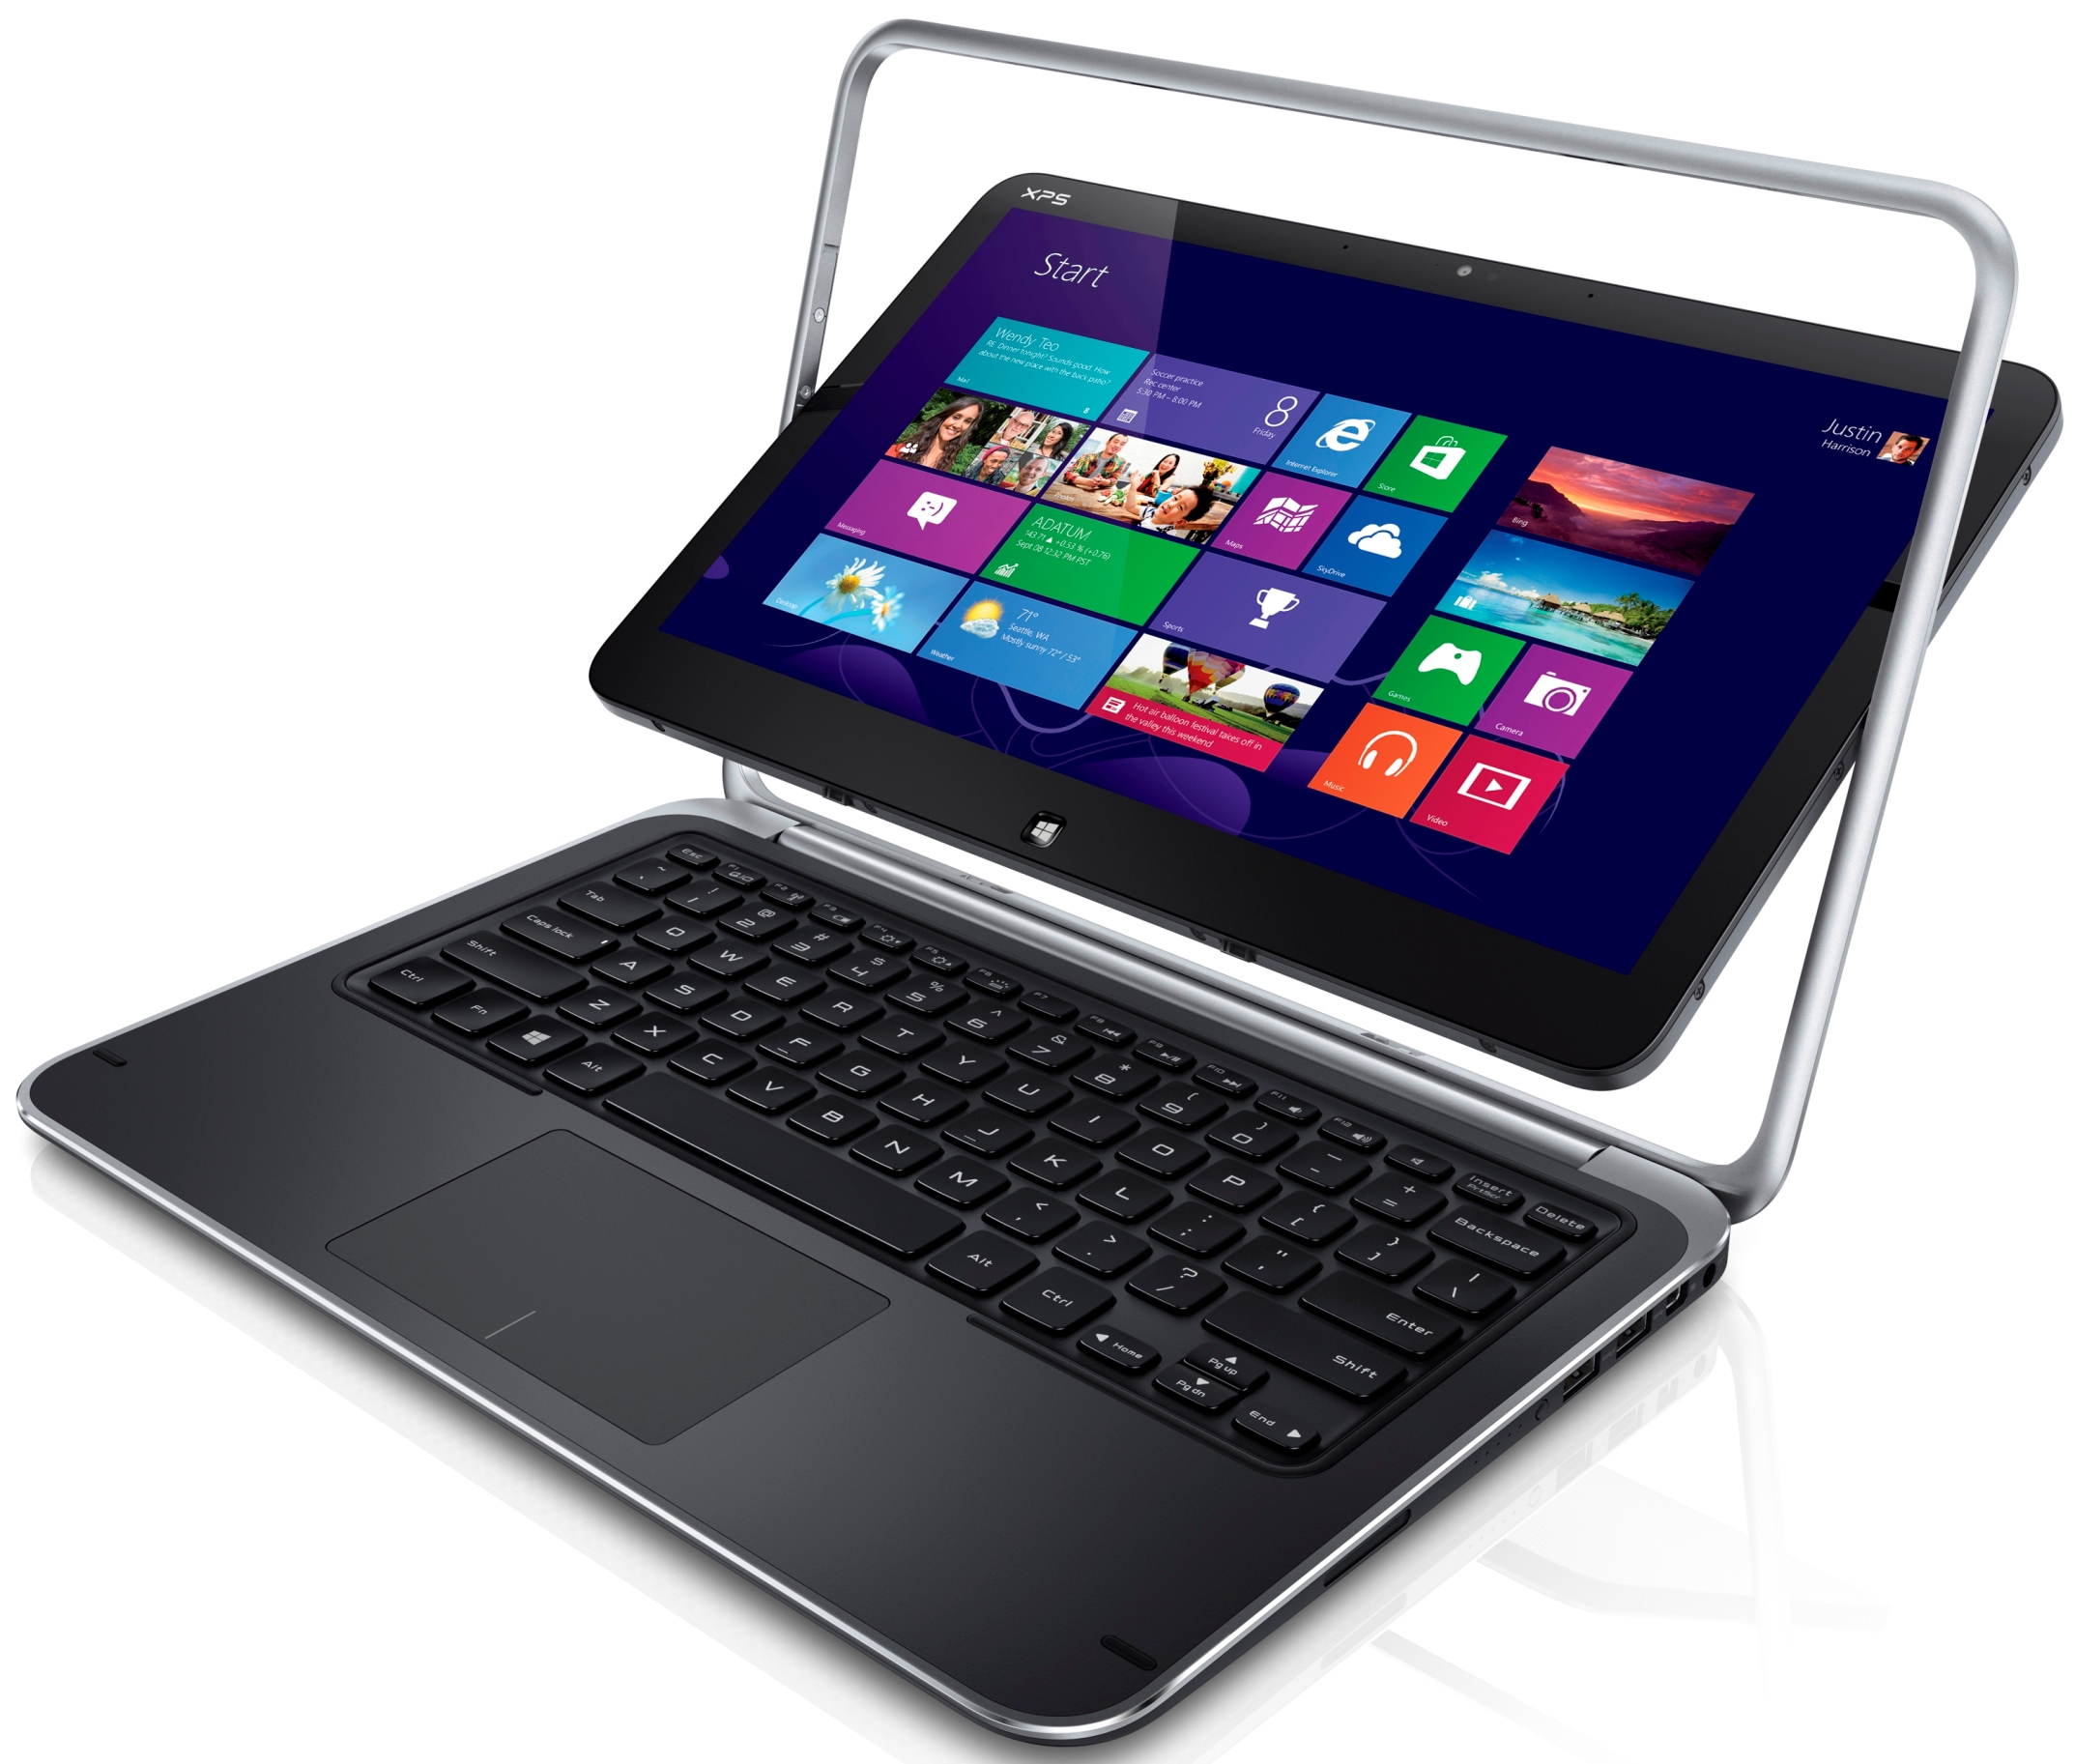 Dell, HP & Asus Windows 8 Tablets Delayed